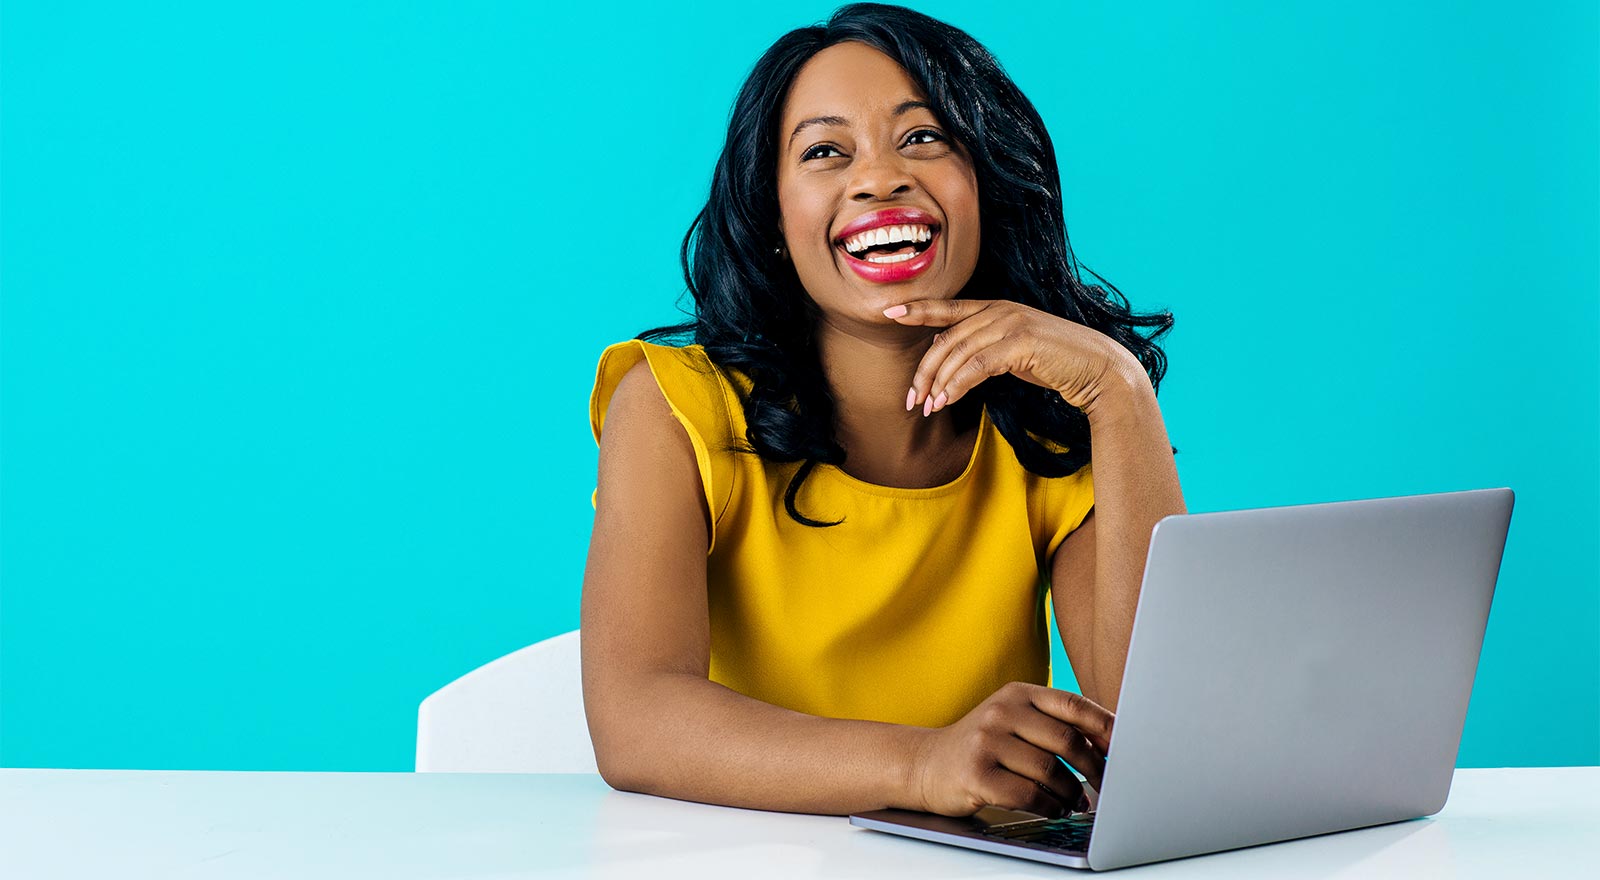 A woman smiling while on her laptop